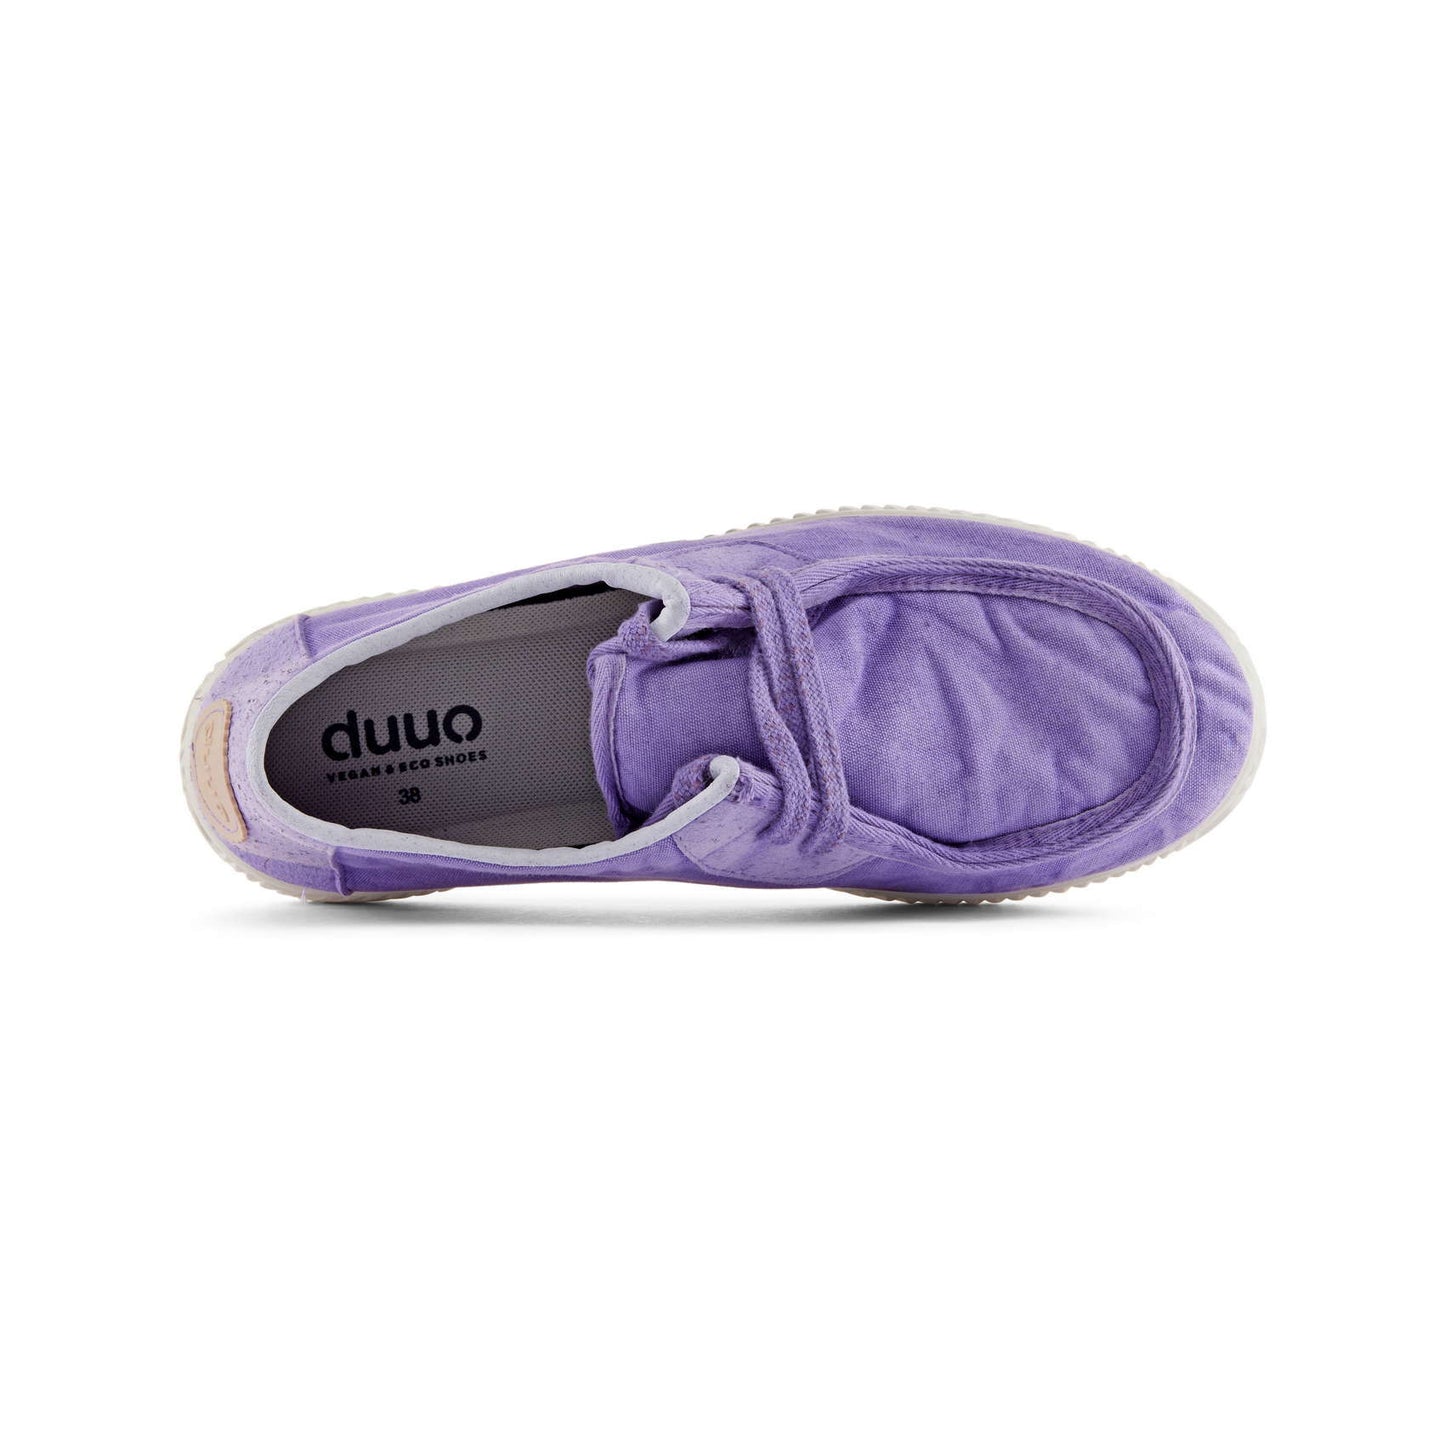 DUUO | 女性のためのスニーカー | ONA WALABY WASHED 050 VIOLET 78) |